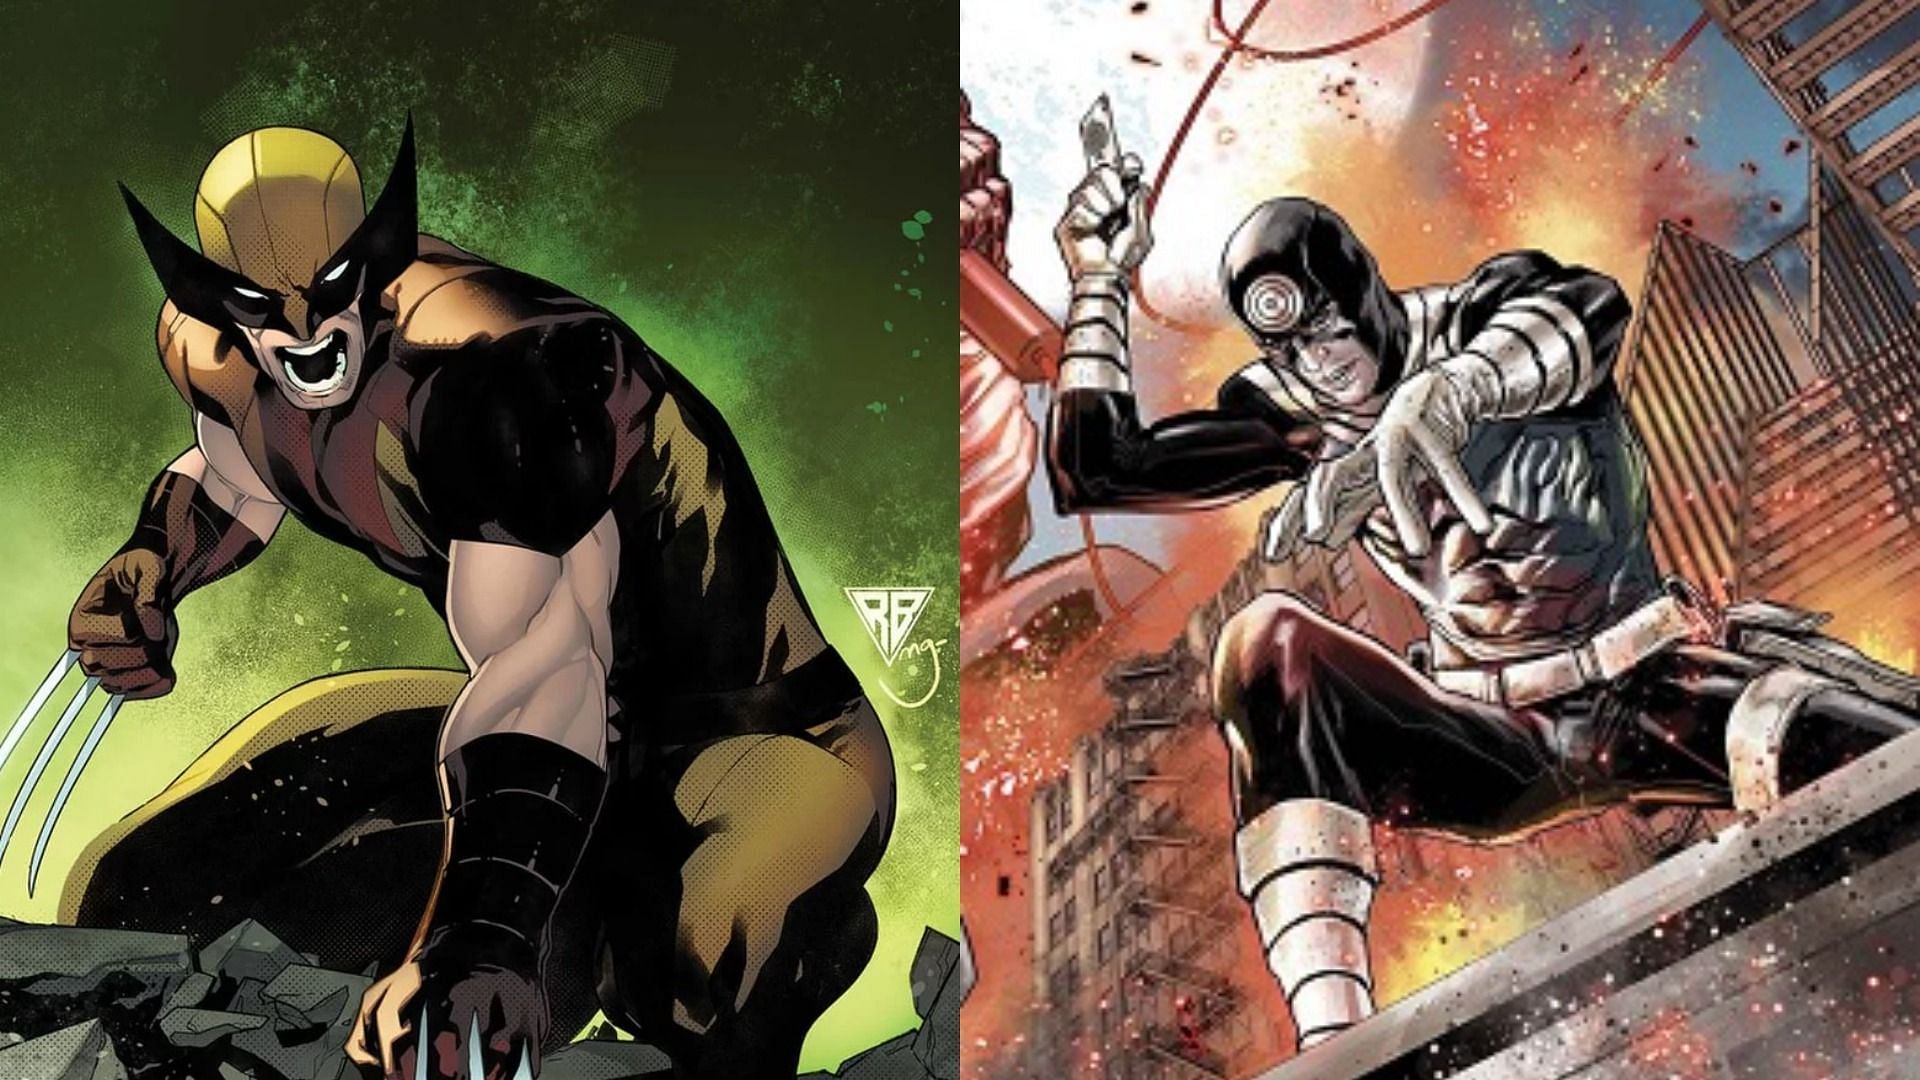 Top comic book characters that are very violent (Image via Marvel)